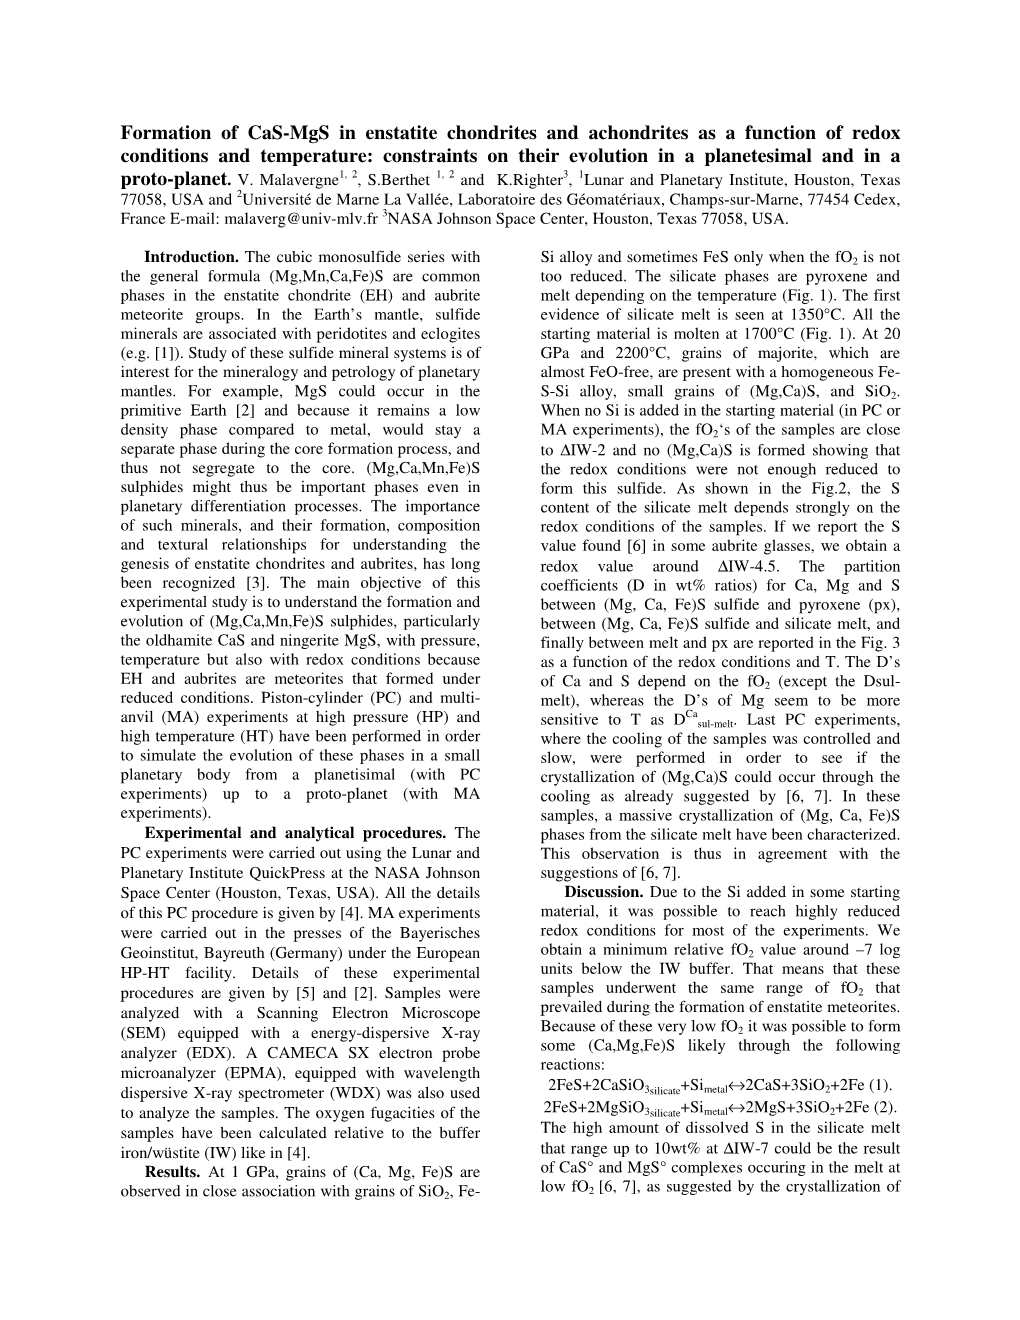 Formation of Cas-Mgs in Enstatite Chondrites and Achondrites As A